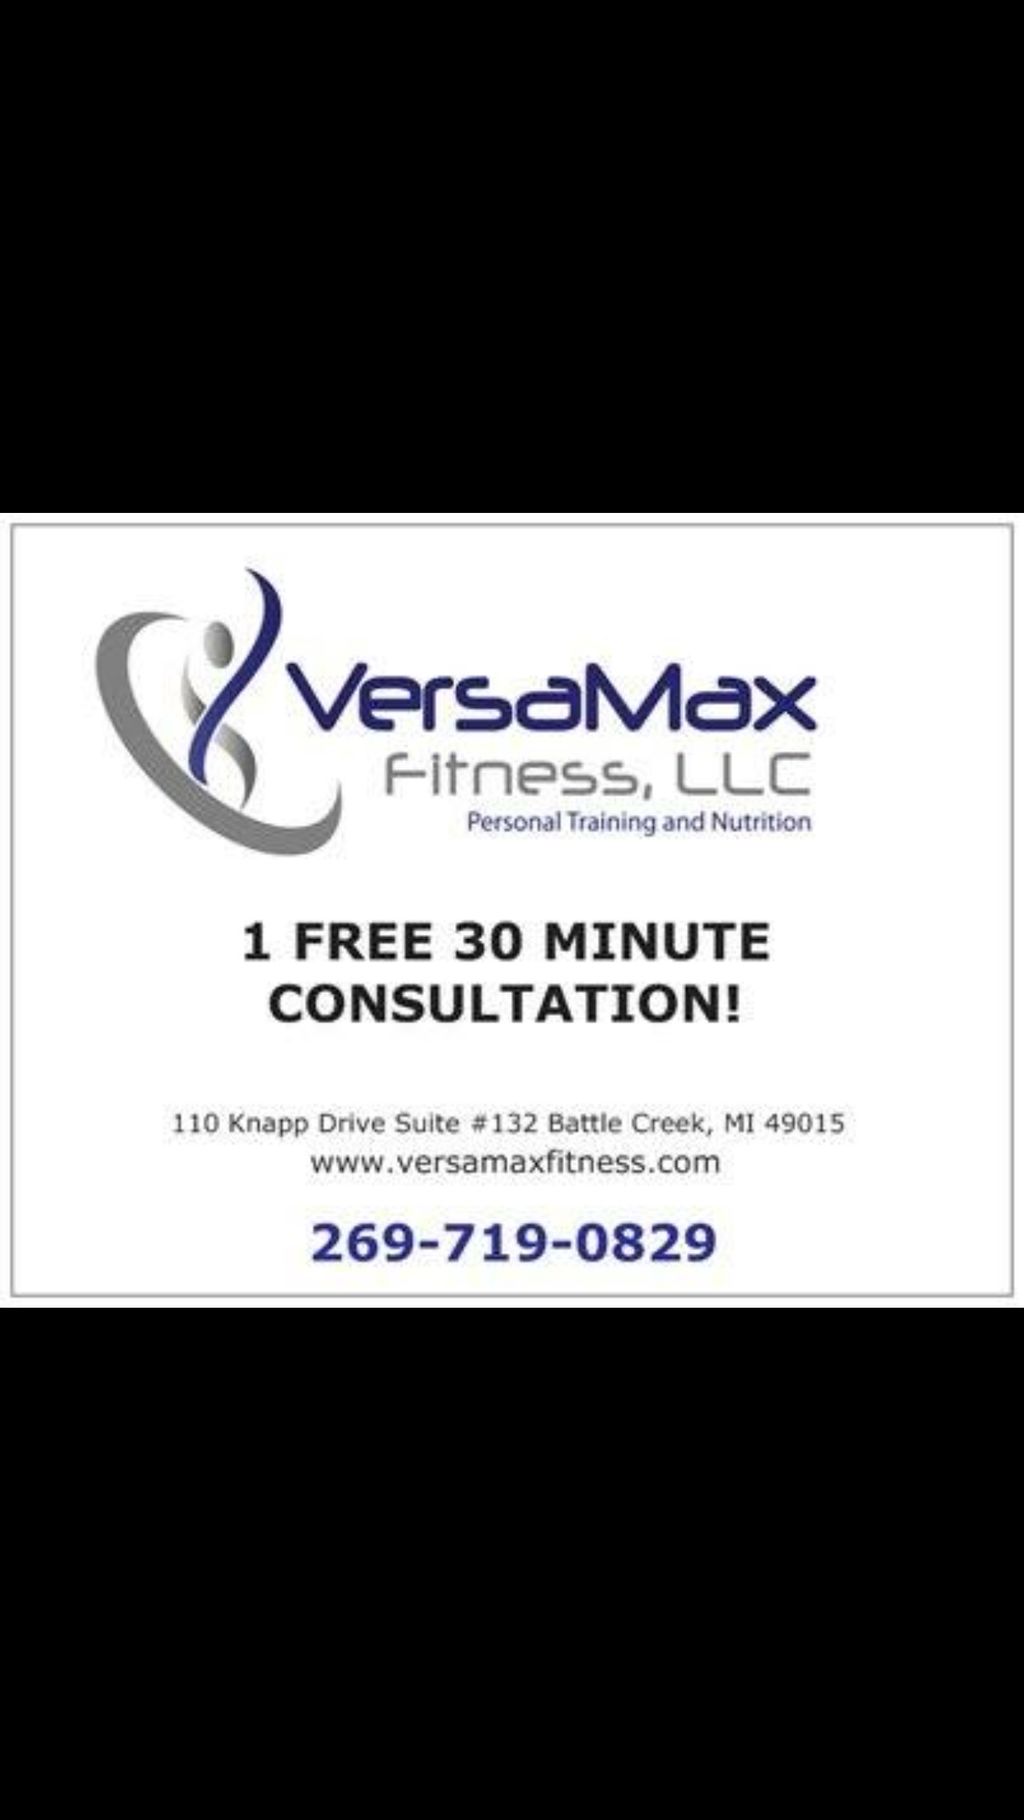 VersaMax Fitness Personal Training and Nutrition